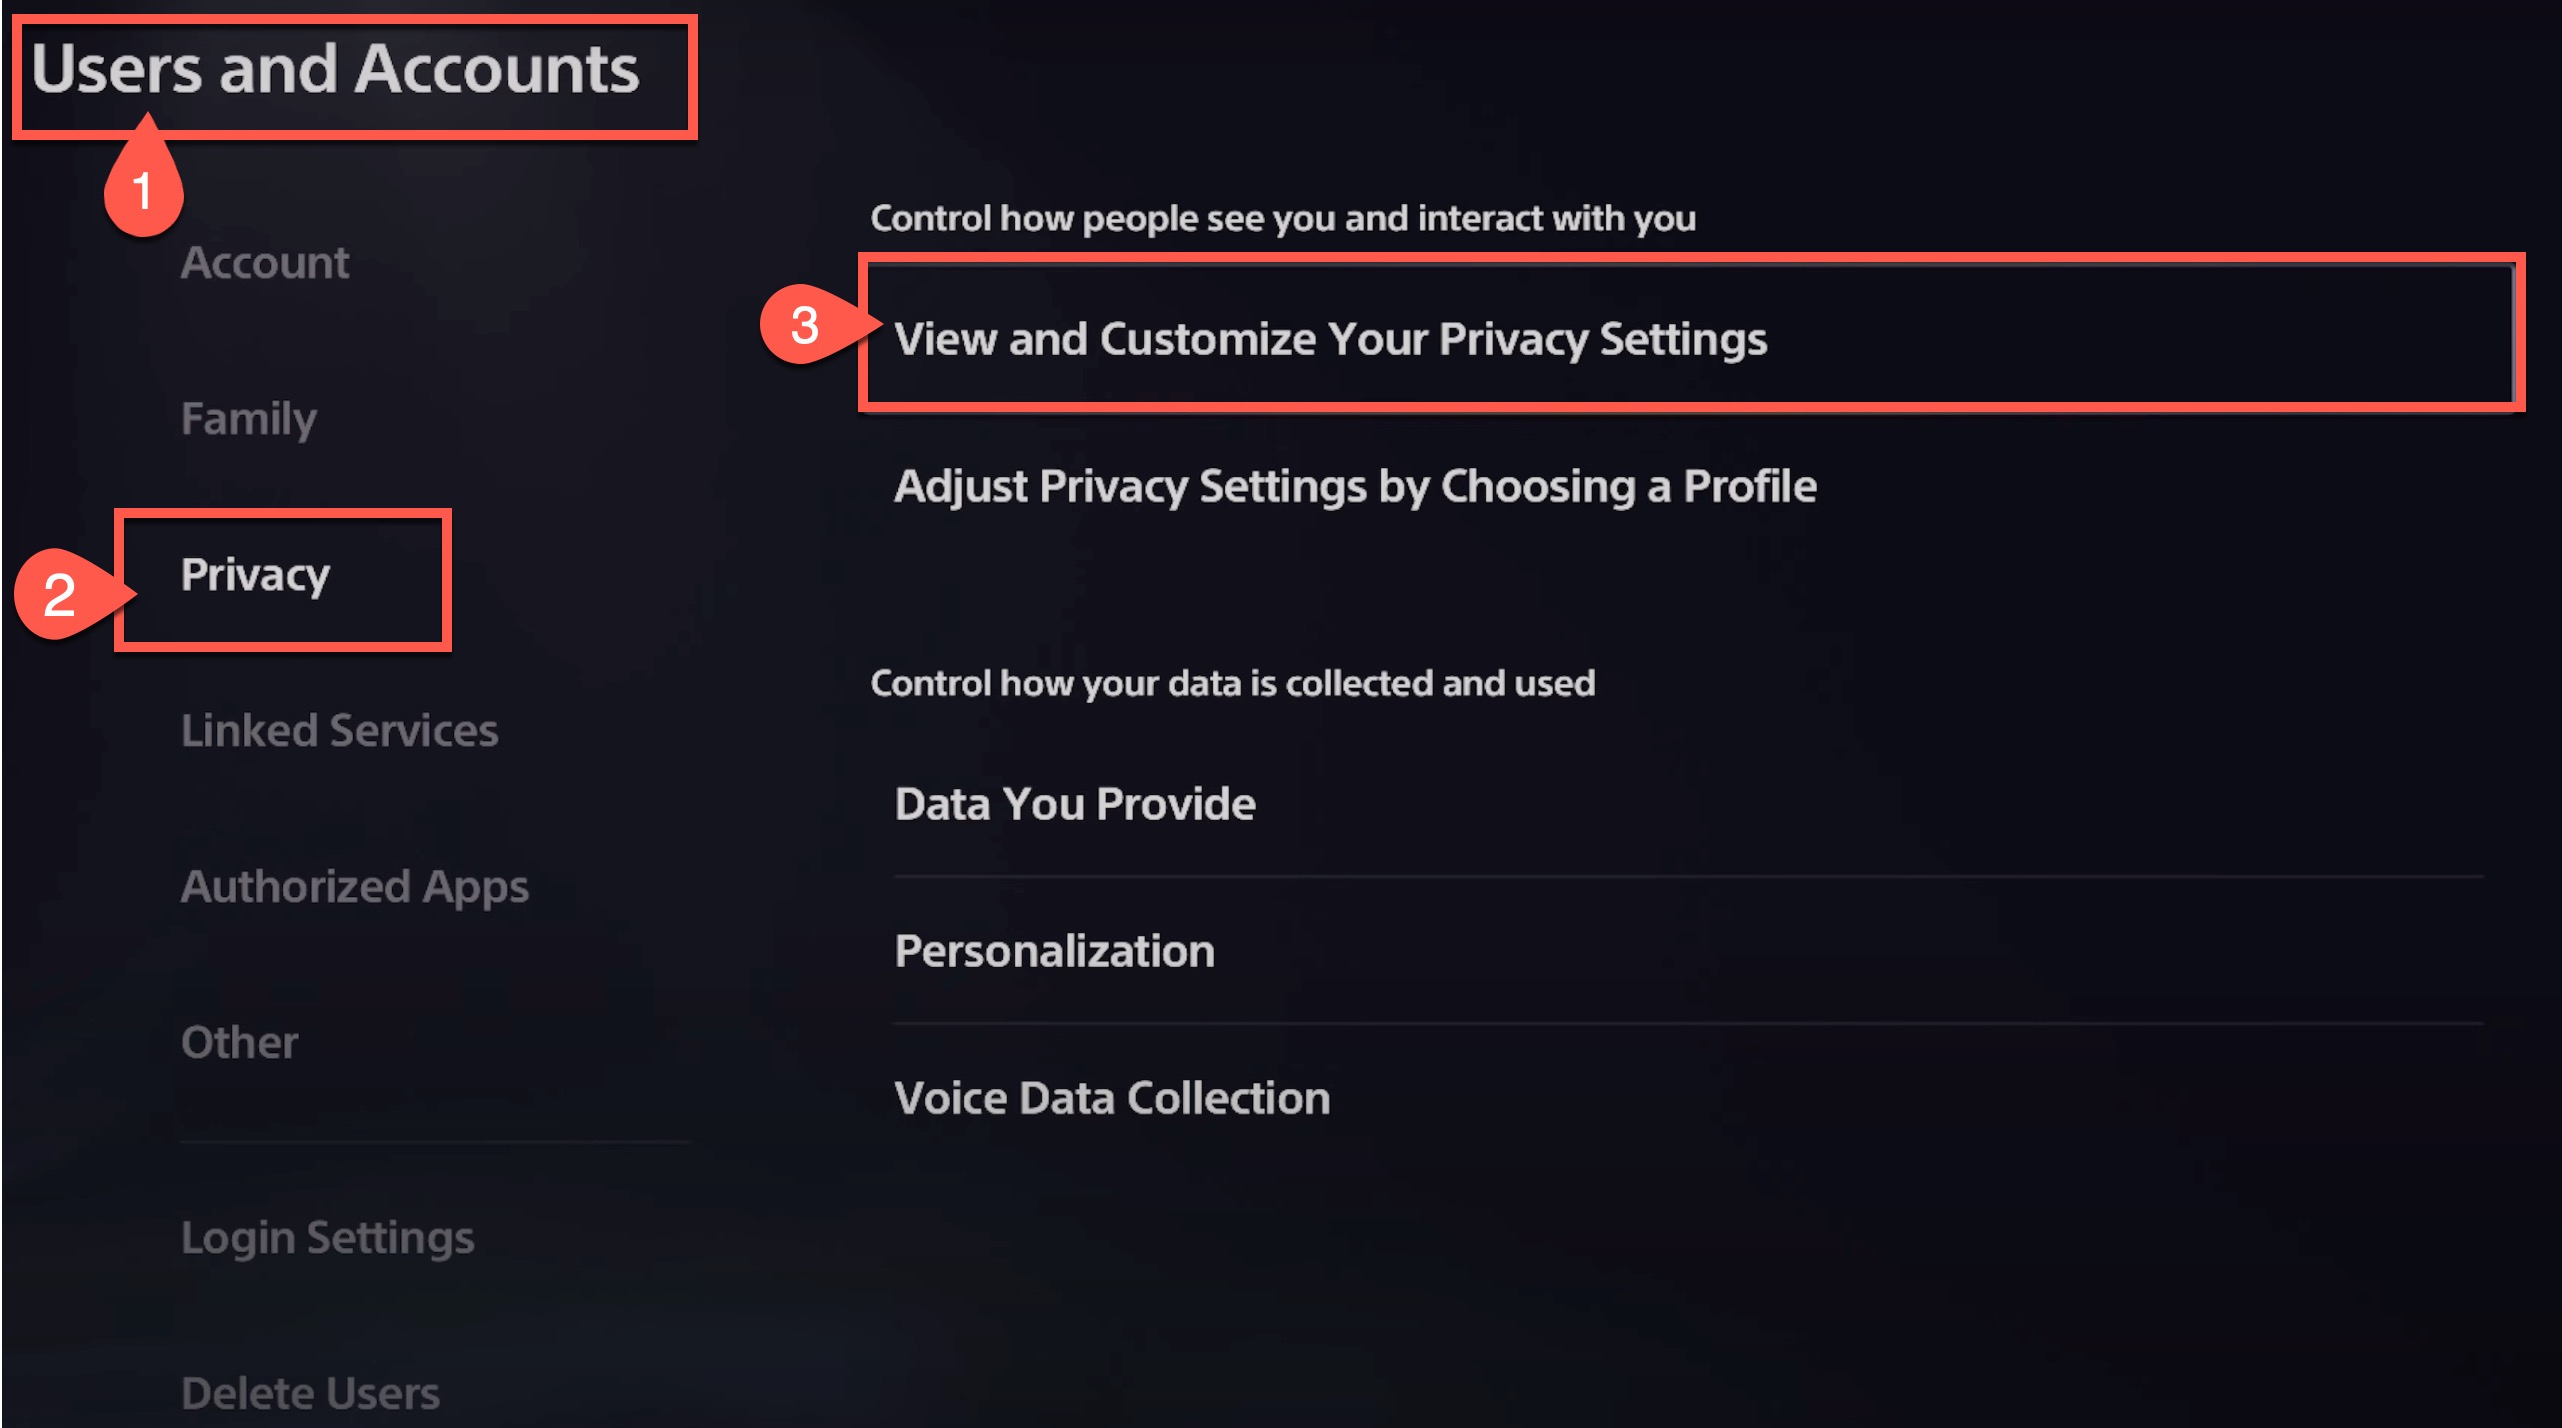 Once you click on 'Users and Accounts', Go to 'Privacy' and 'Click on View and Customize Your Privacy Settings'.